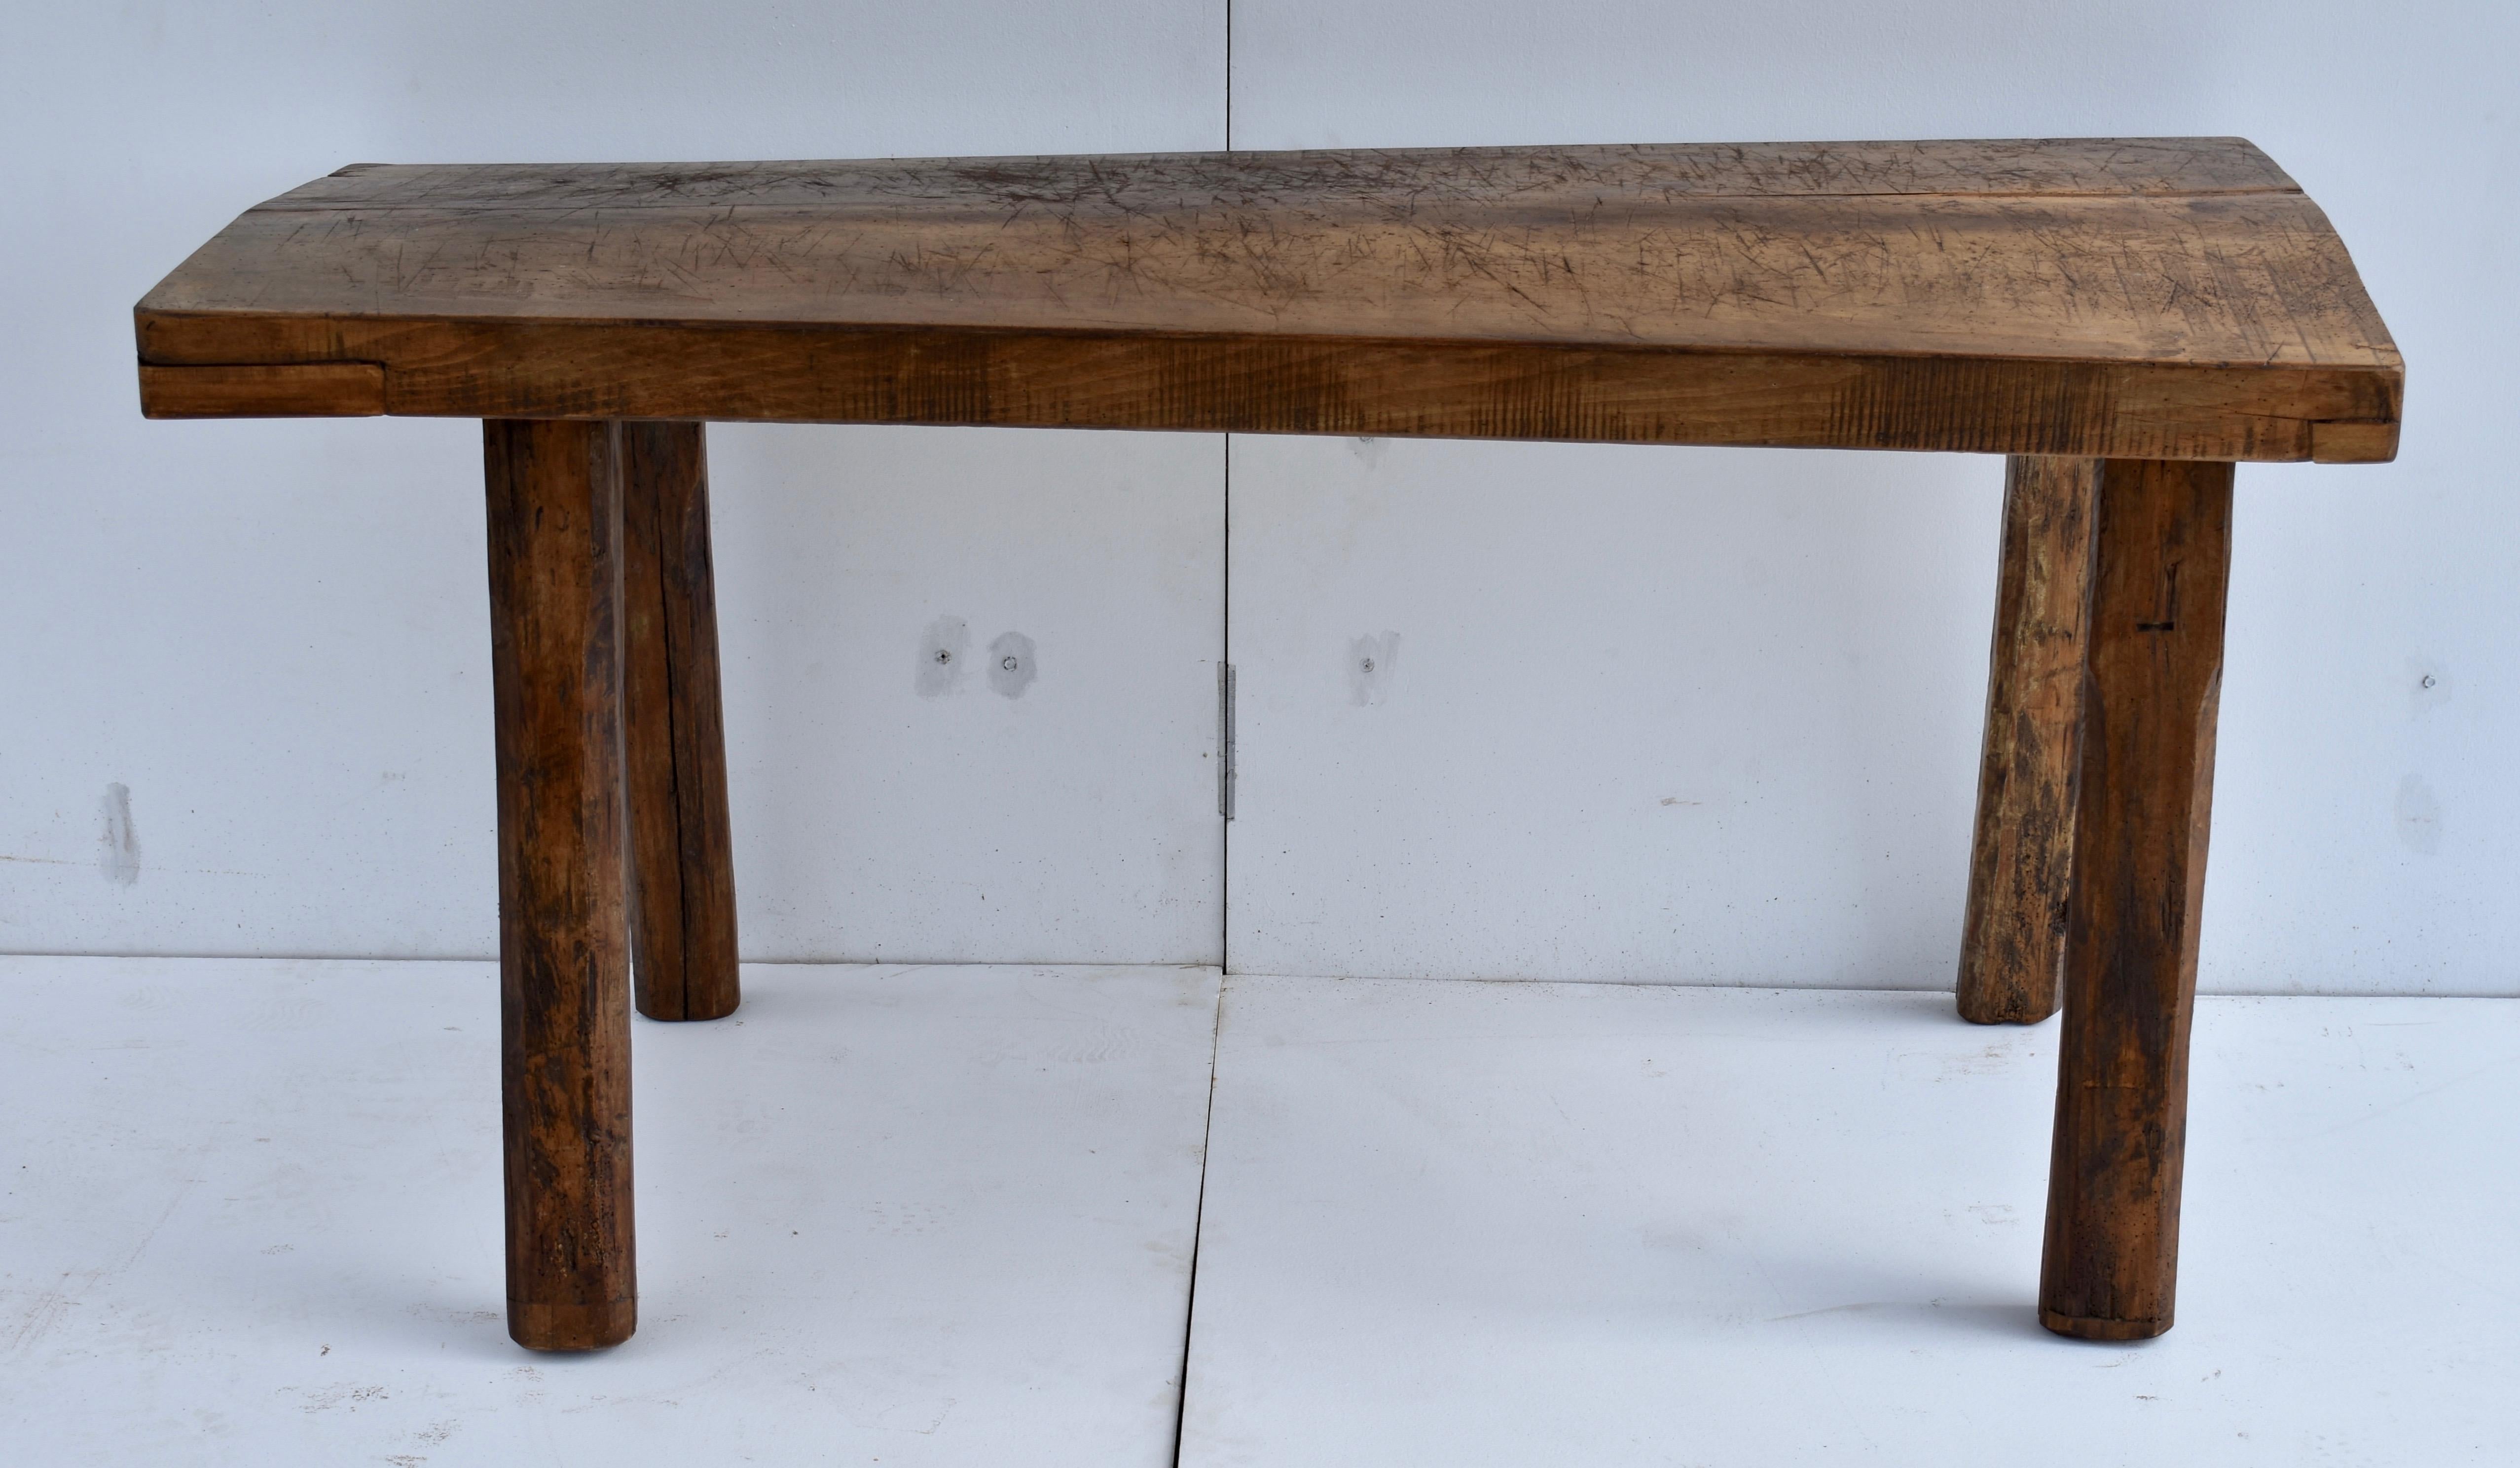 This rather elephantine Pig Bench has a number of interesting features. The top is a massive slab of oak almost 3” thick, which over the years has developed a hump and a twist. The legs have been trimmed to compensate, so it still stands perfectly